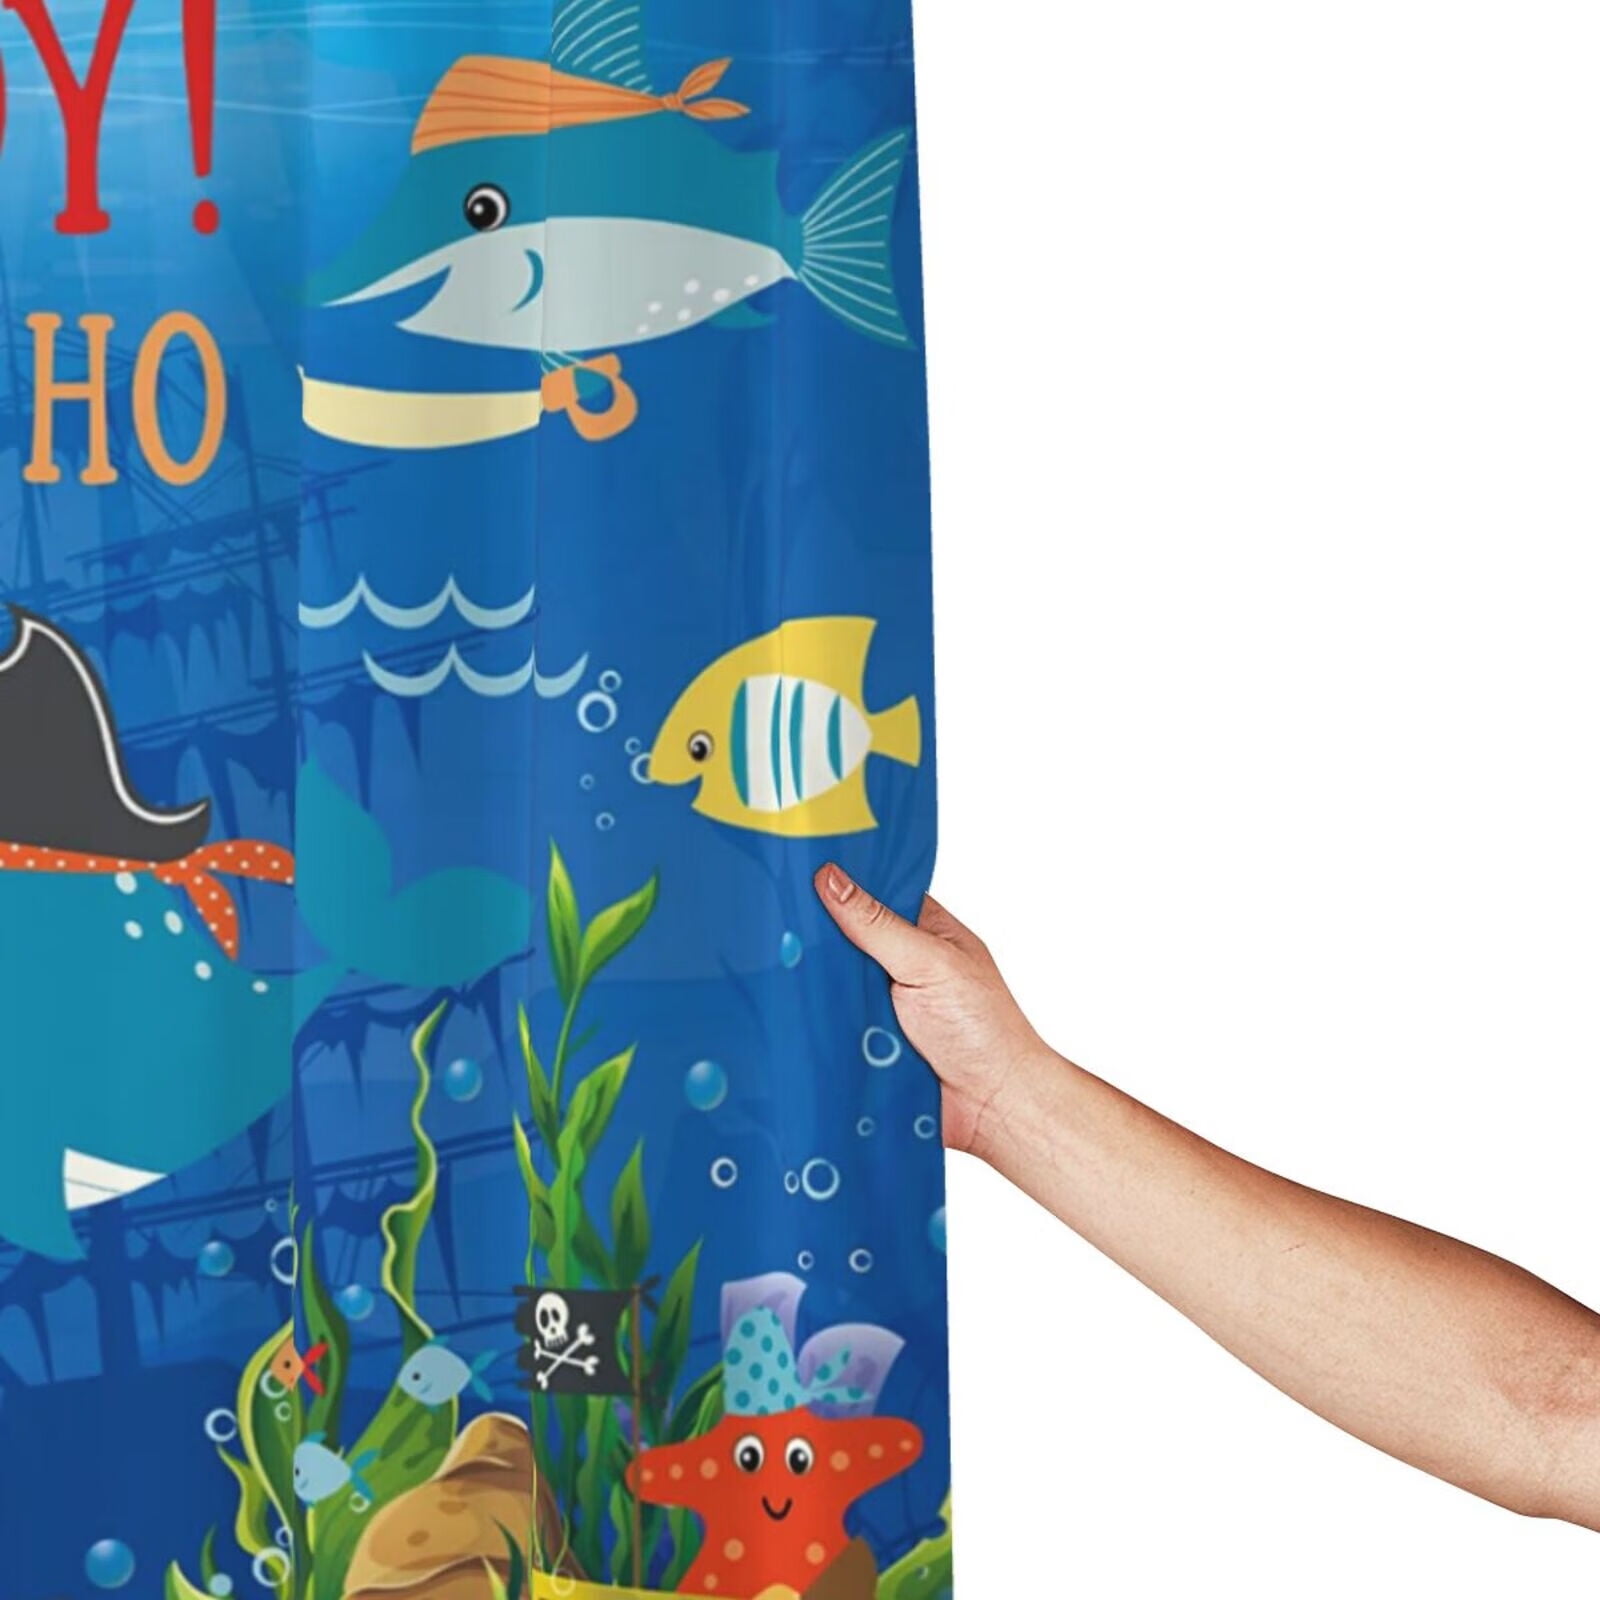 Ocean Shower Curtain,Cartoon Under Sea Animal Whales Fishes and Coral Reefs  Cute Design for Kids Room Decor, Hooks Included, 72x72 